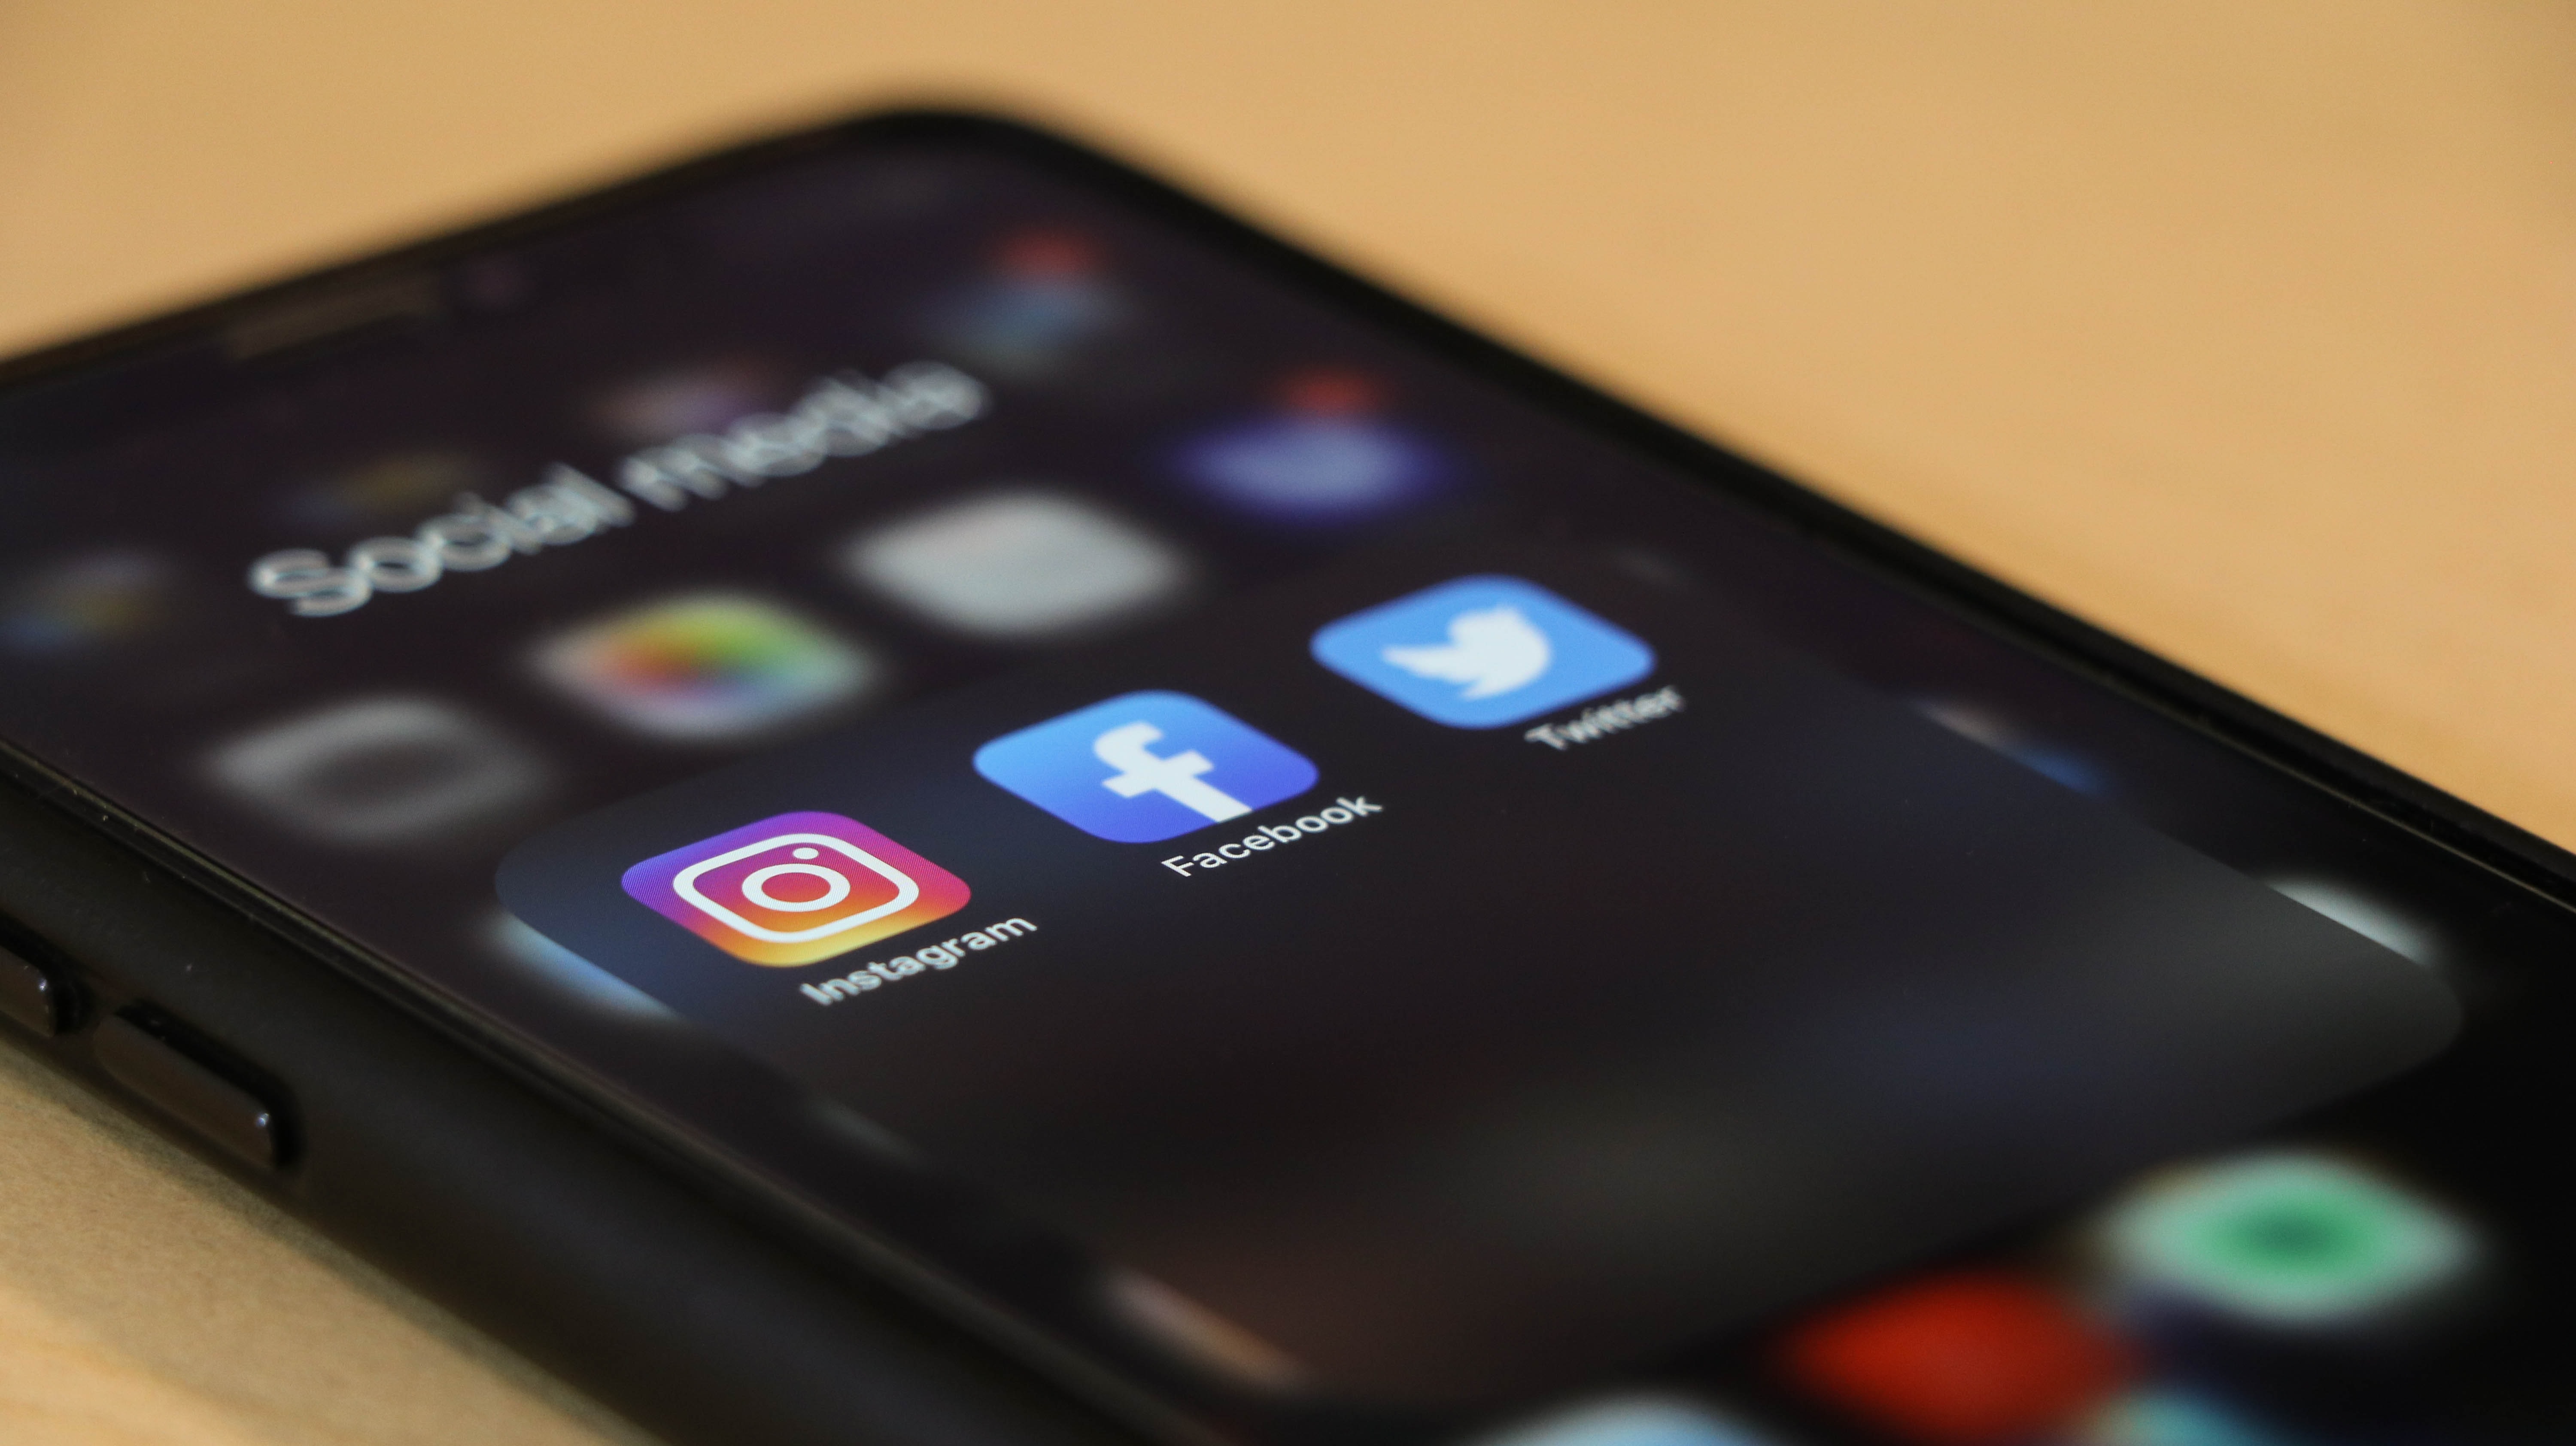 App icons on a smartphone - Does social media marketing work in the B2B marketplace? - Copify blog